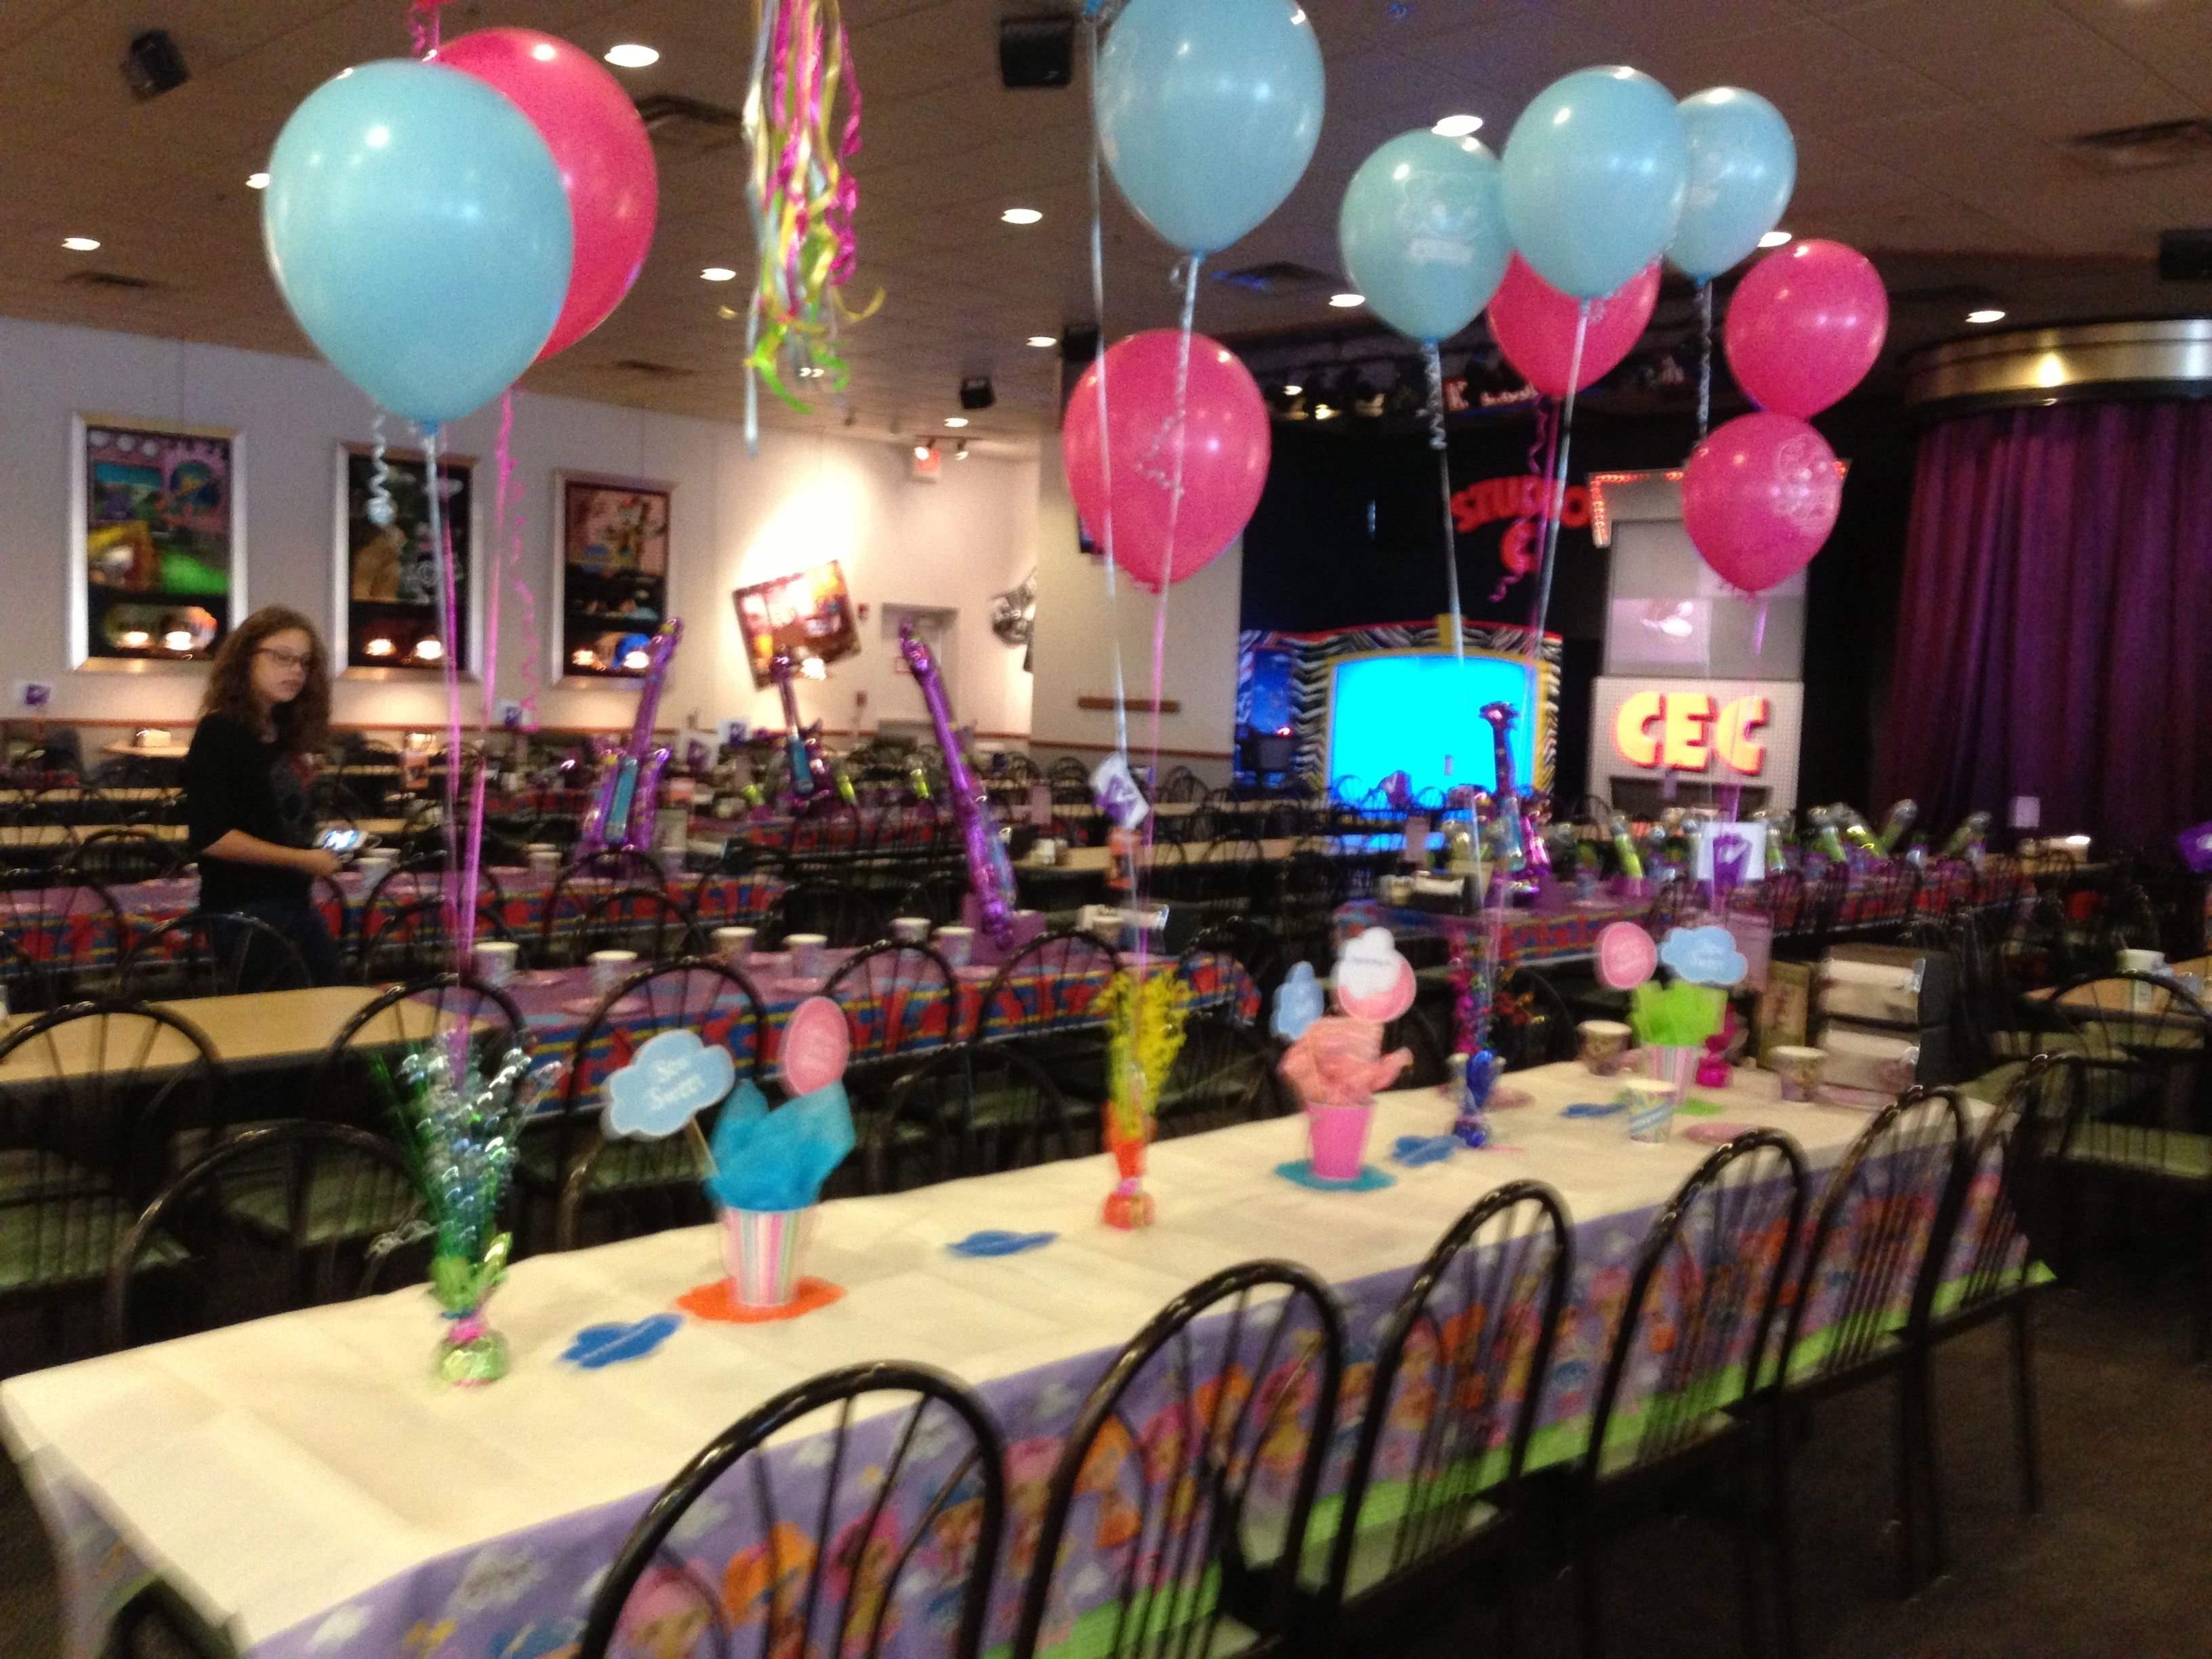 10 Best Chuck E Cheese Birthday Party Ideas lalaloopsy set up at chuck e cheese cumpleanos pinterest 2022